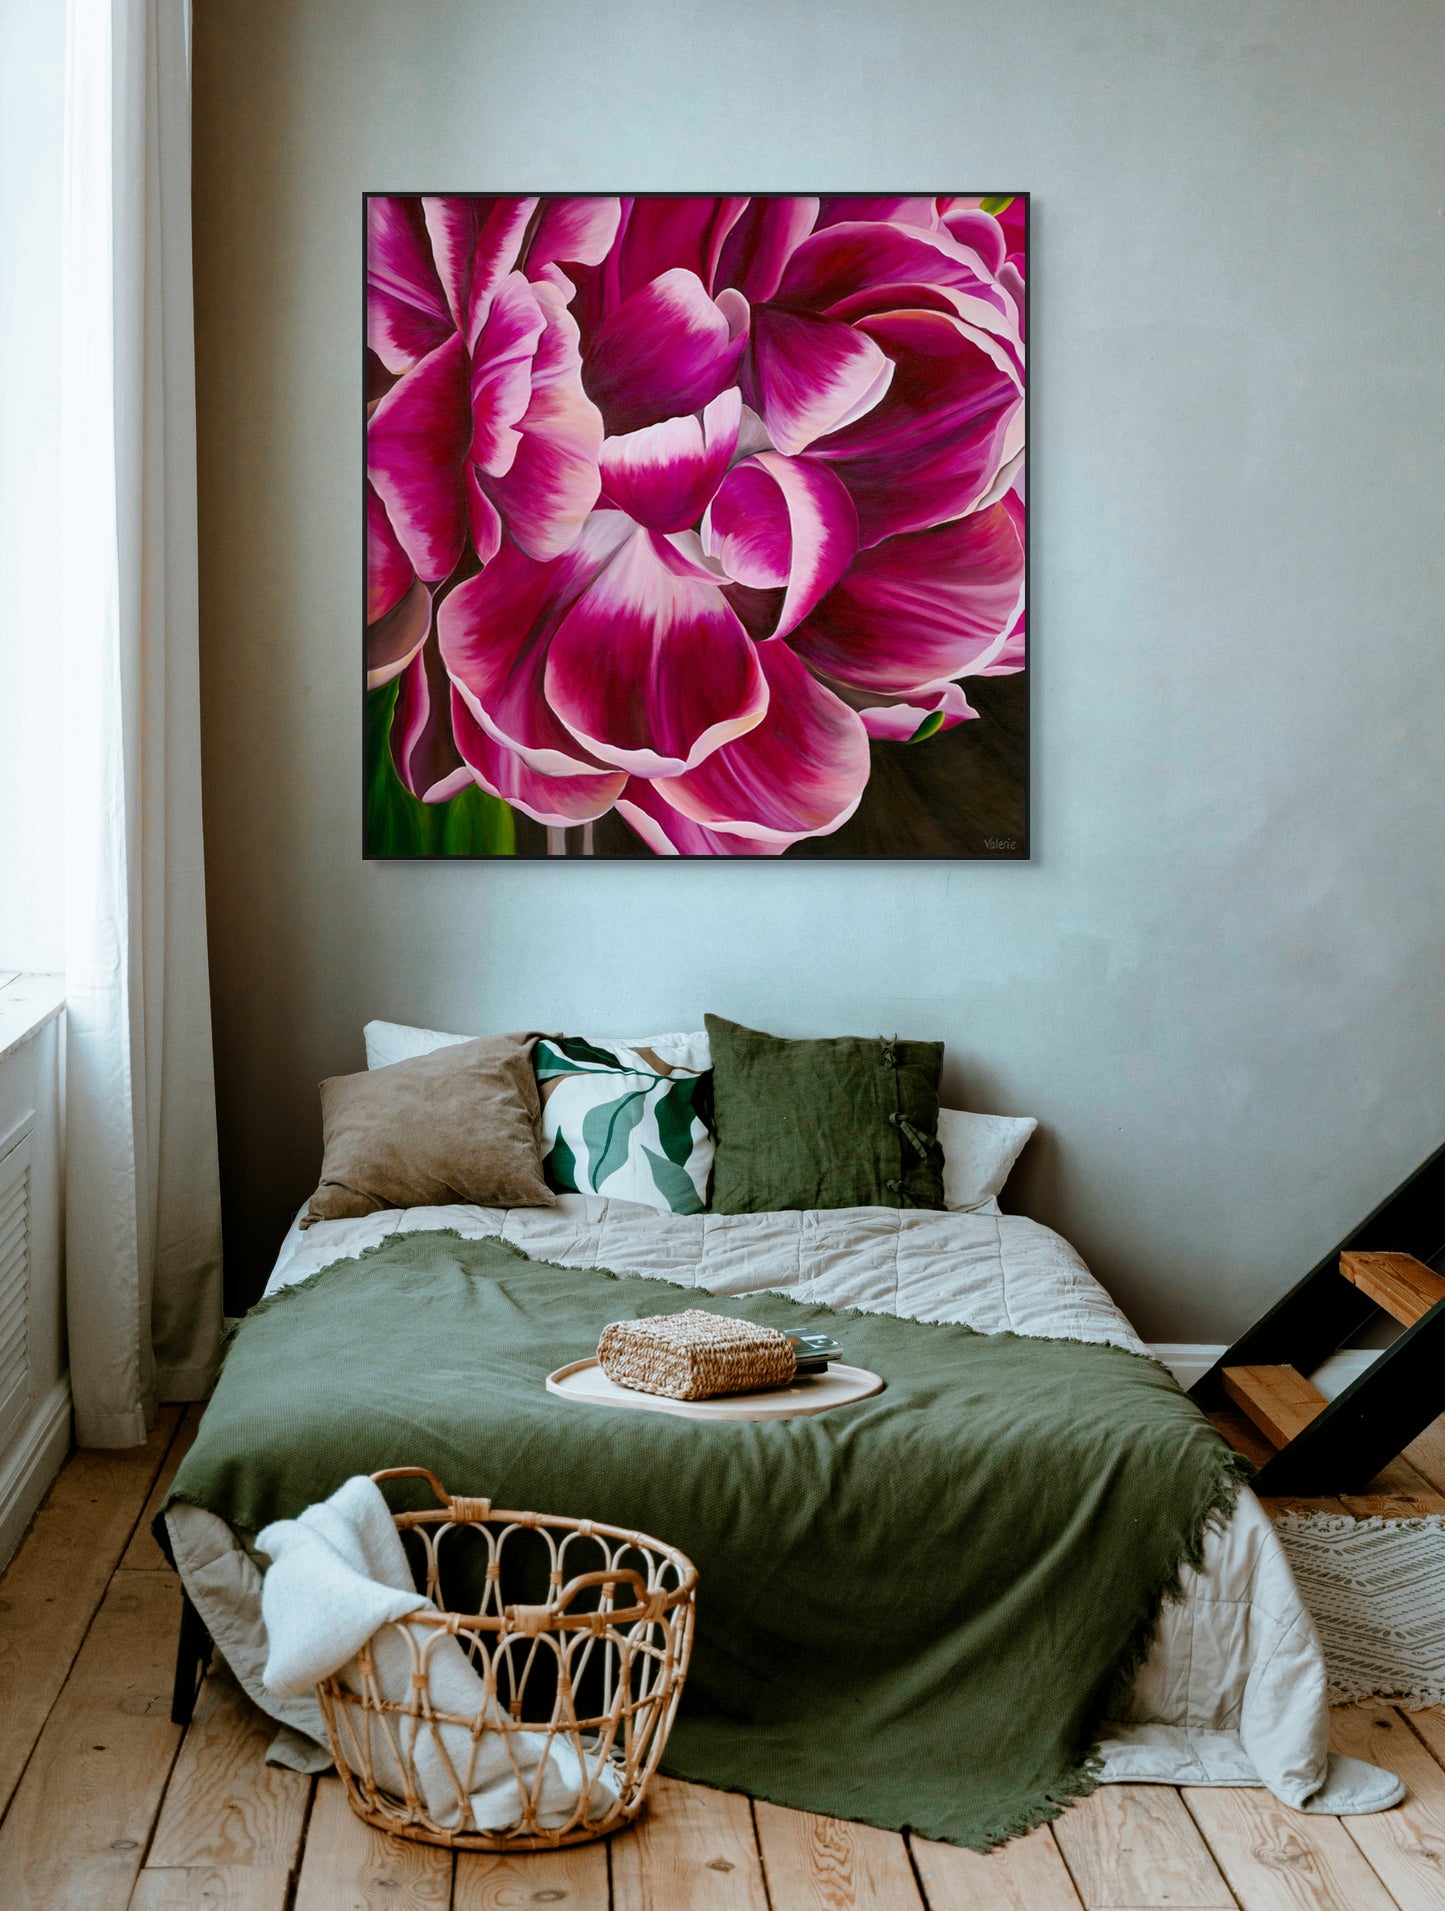 The Tulips Are Too Excitable – Limited Edition Print